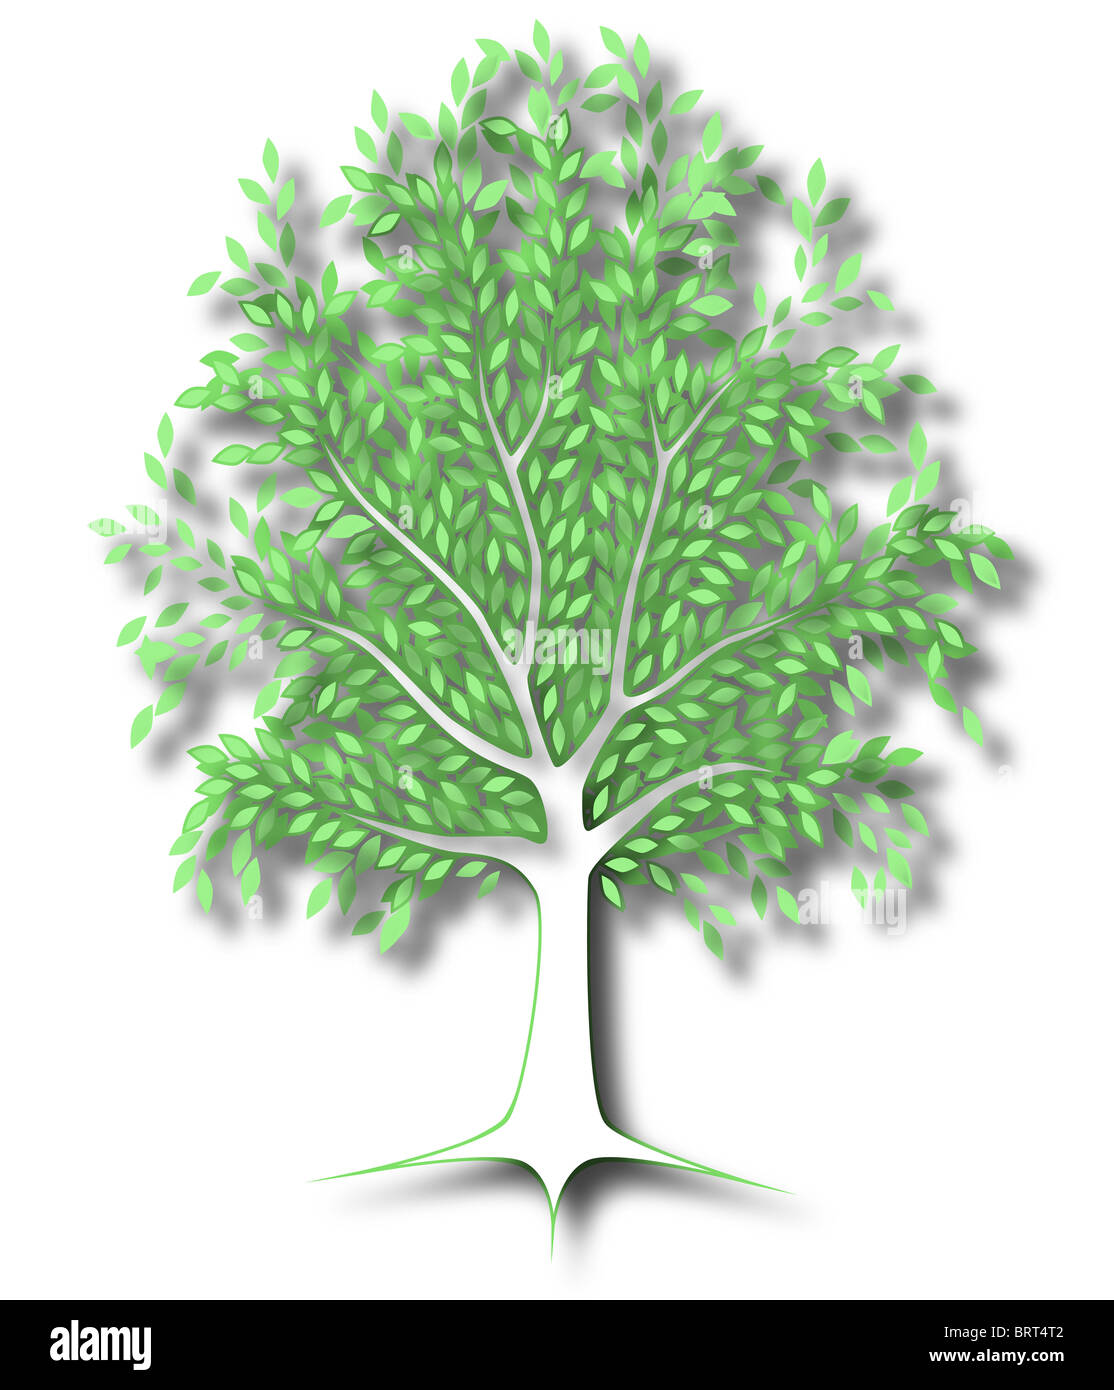 Illustration of a cutout tree with shading Stock Photo